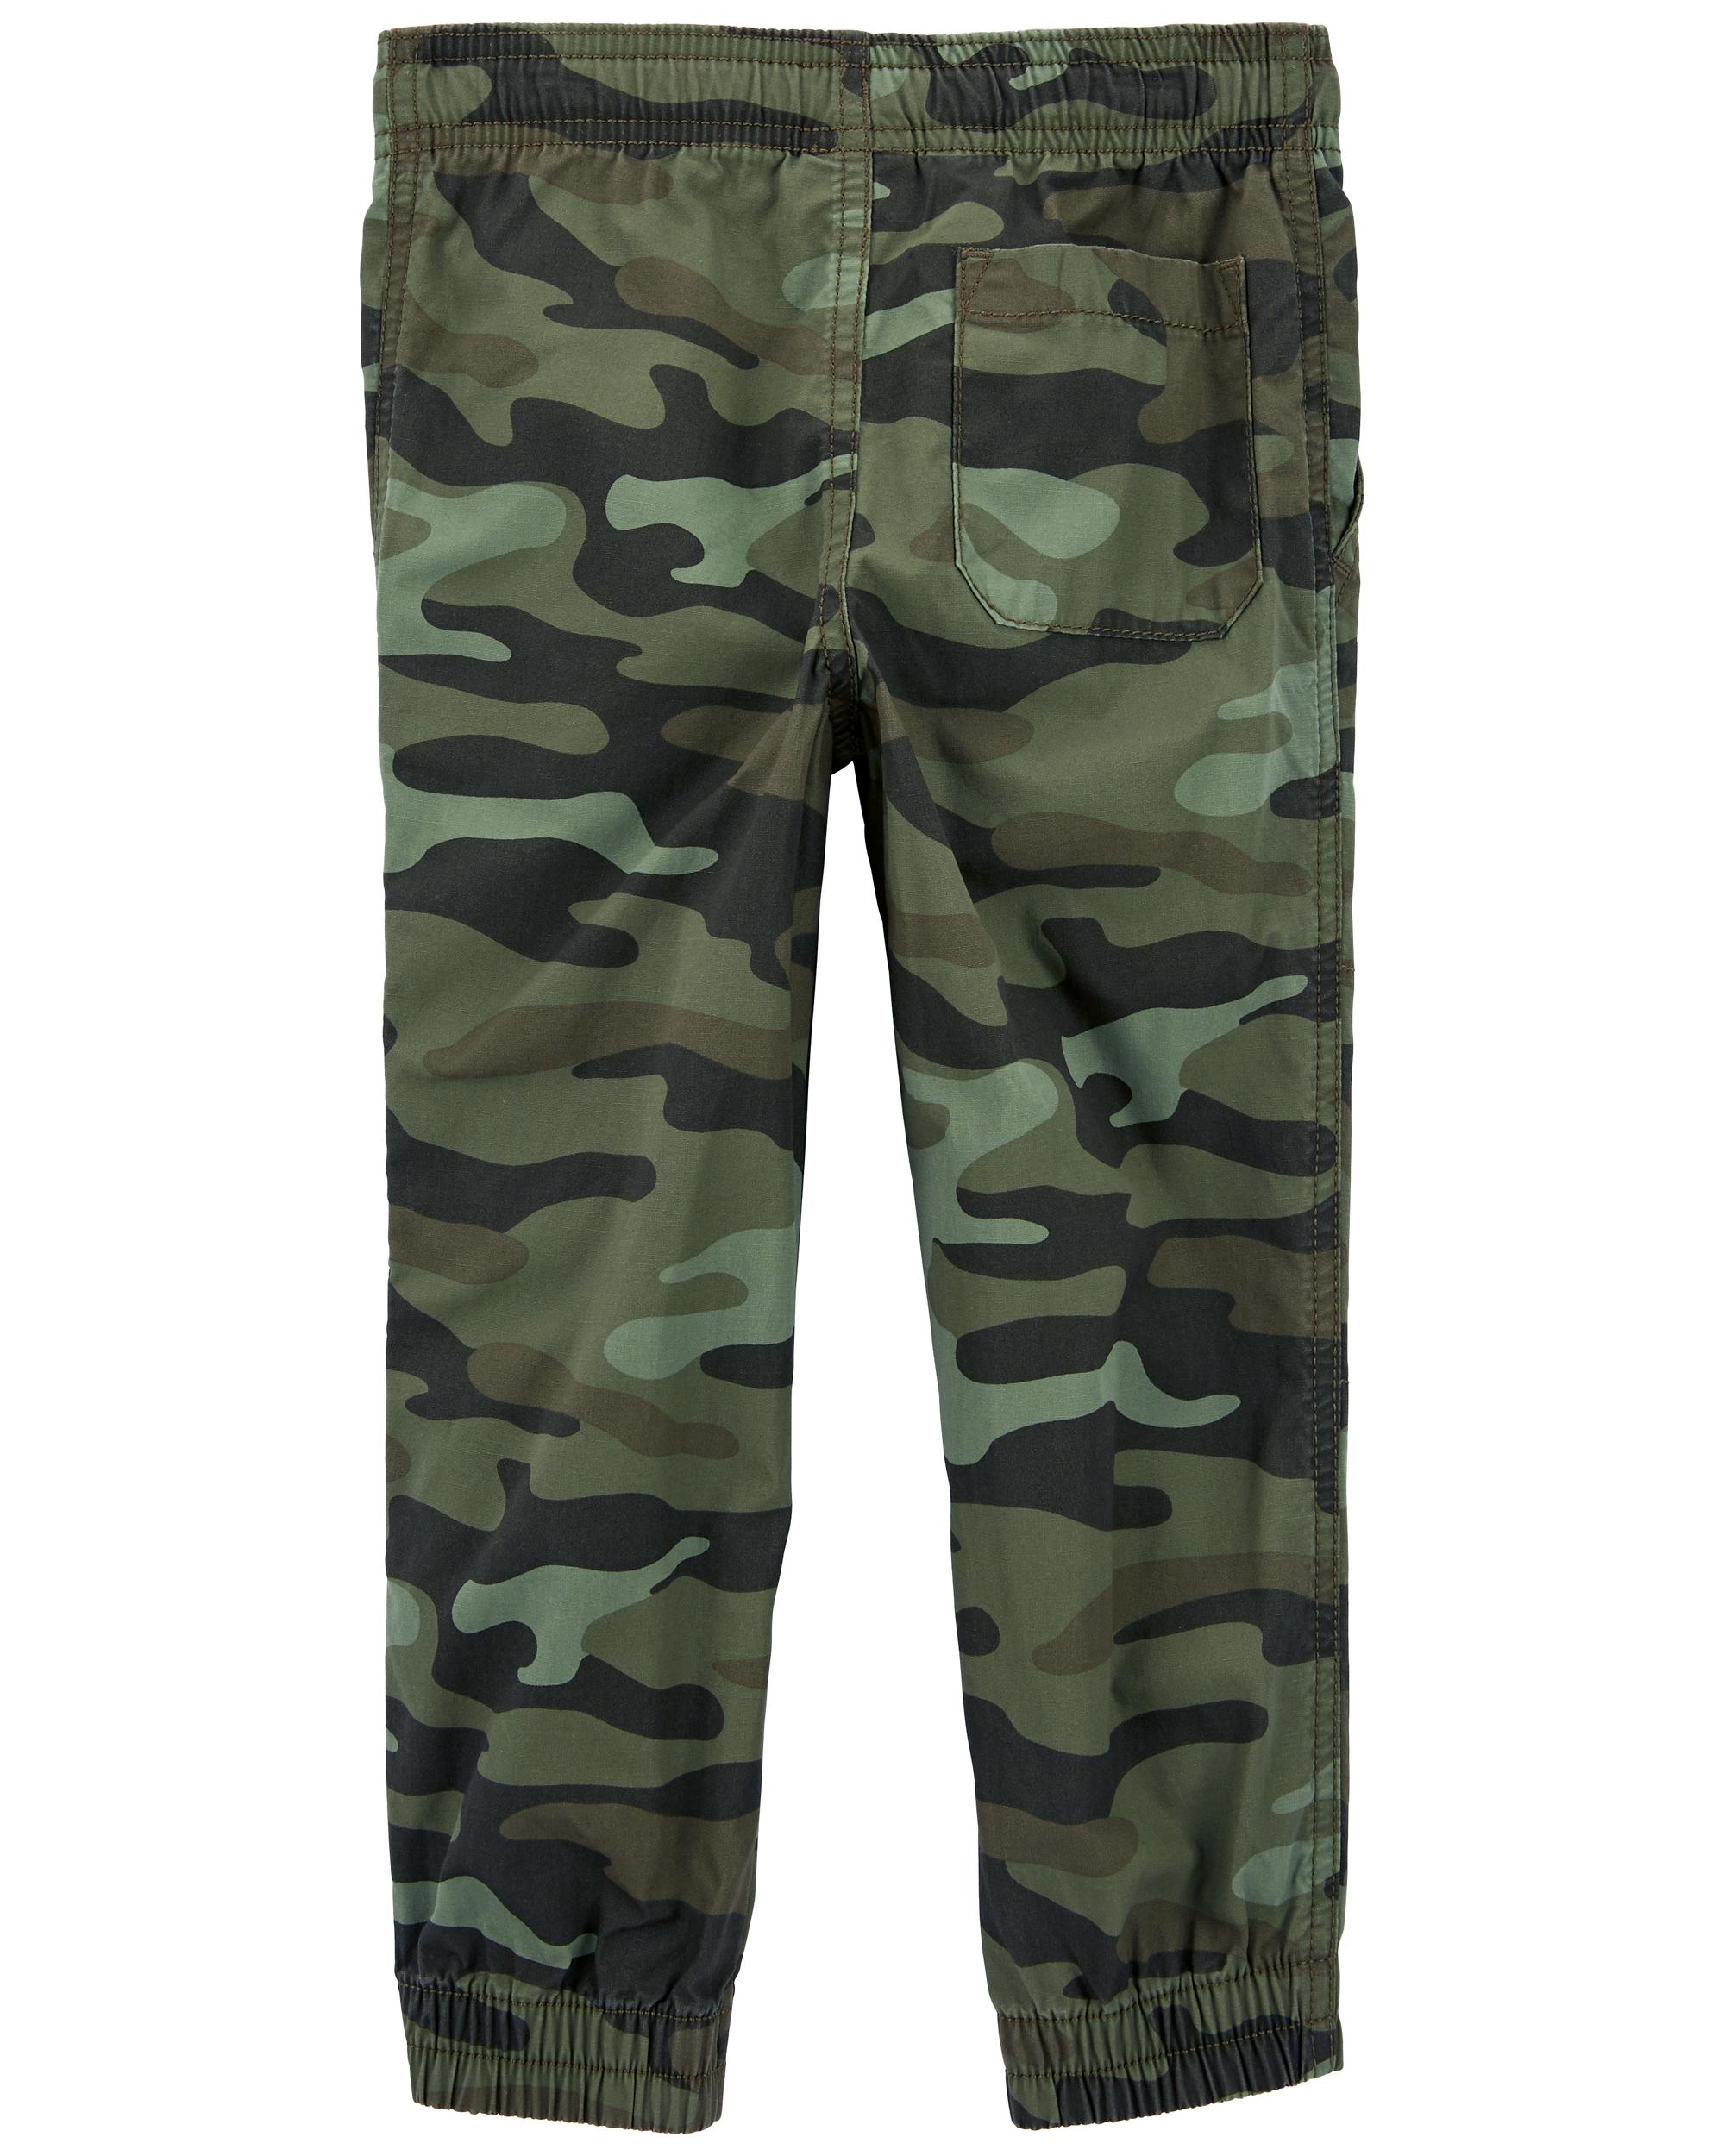 Toddler Camo Everyday Pull-On Pants